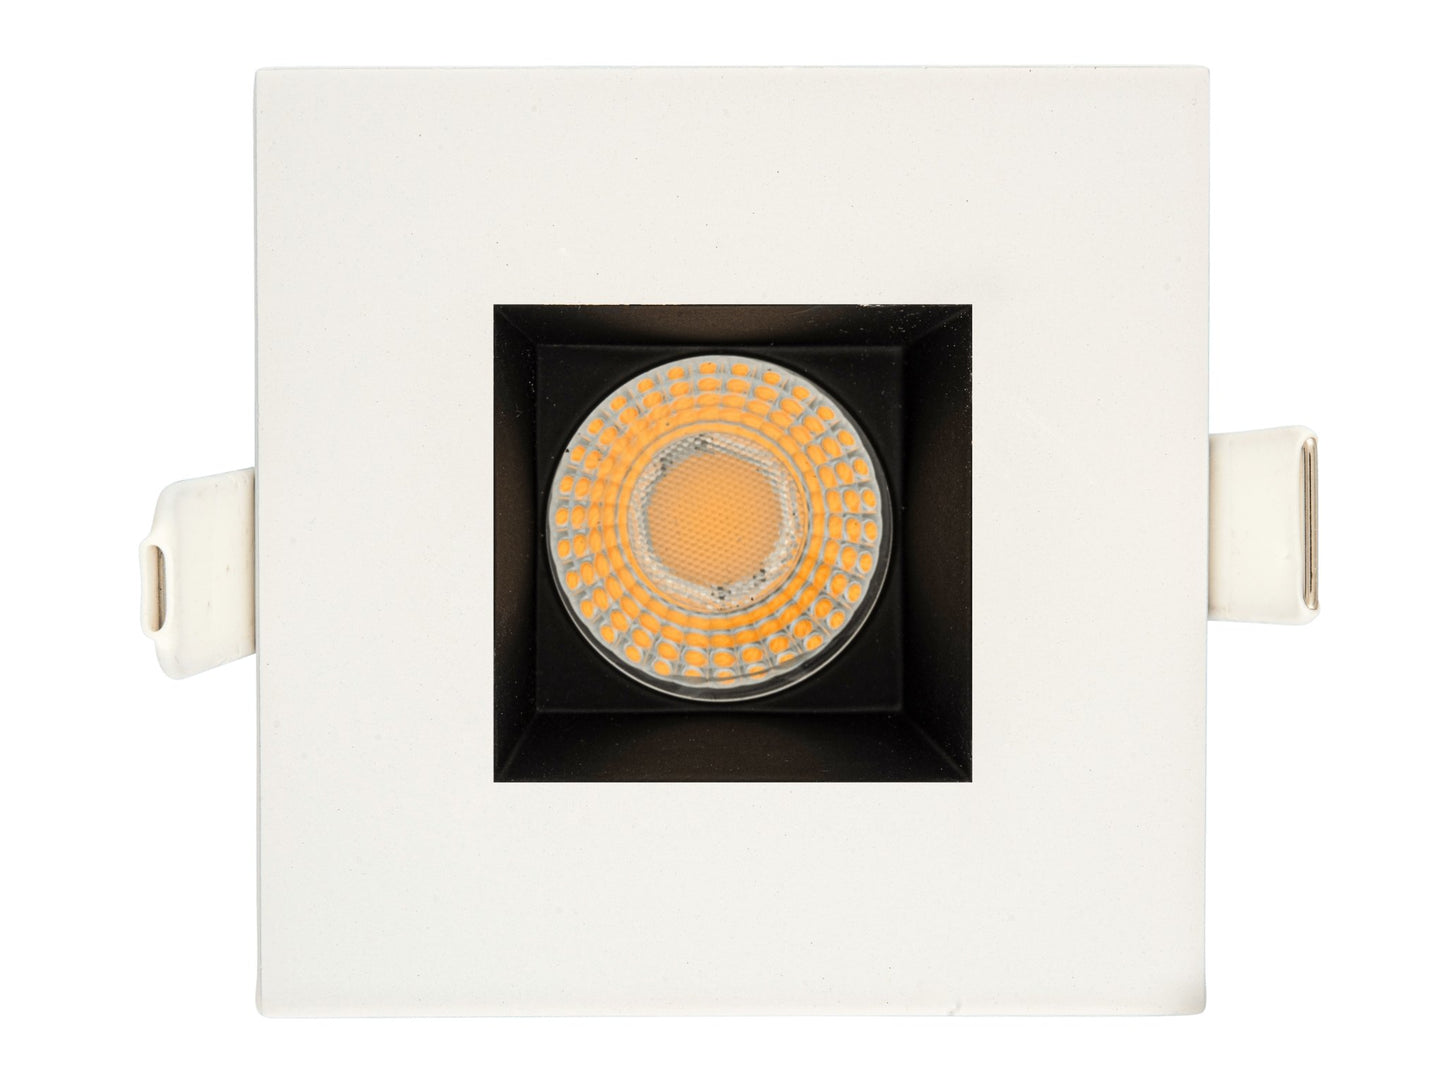 GDL-G48346Goodlite Changeable Trim for 2" 8W/14W Regress Luminaire Selectable CCT